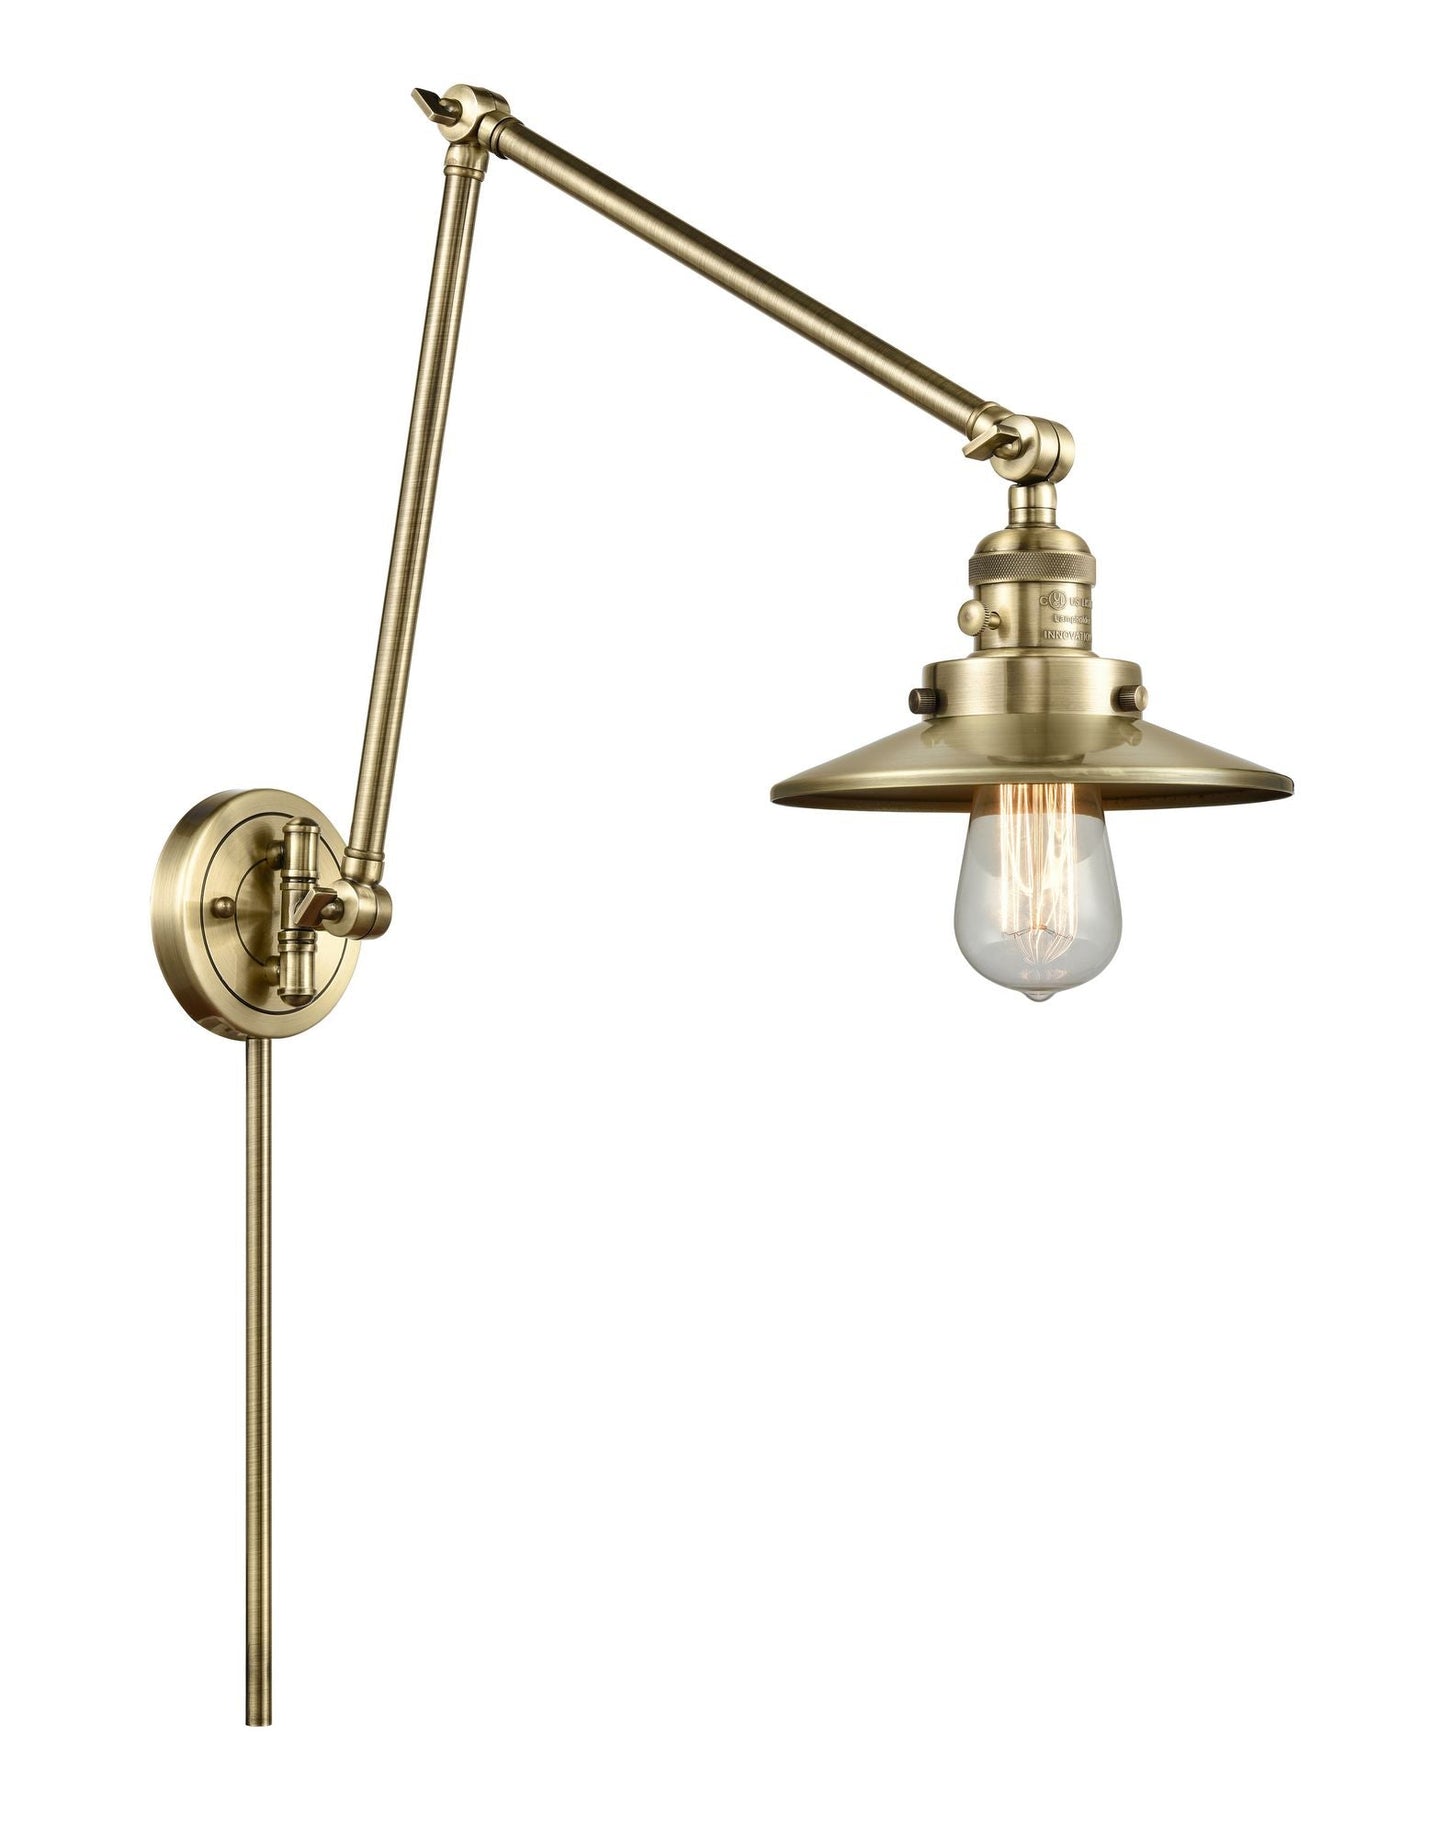 1-Light 8" Antique Brass Swing Arm - Antique Brass Railroad Shade - Incandesent Or LED Bulbs